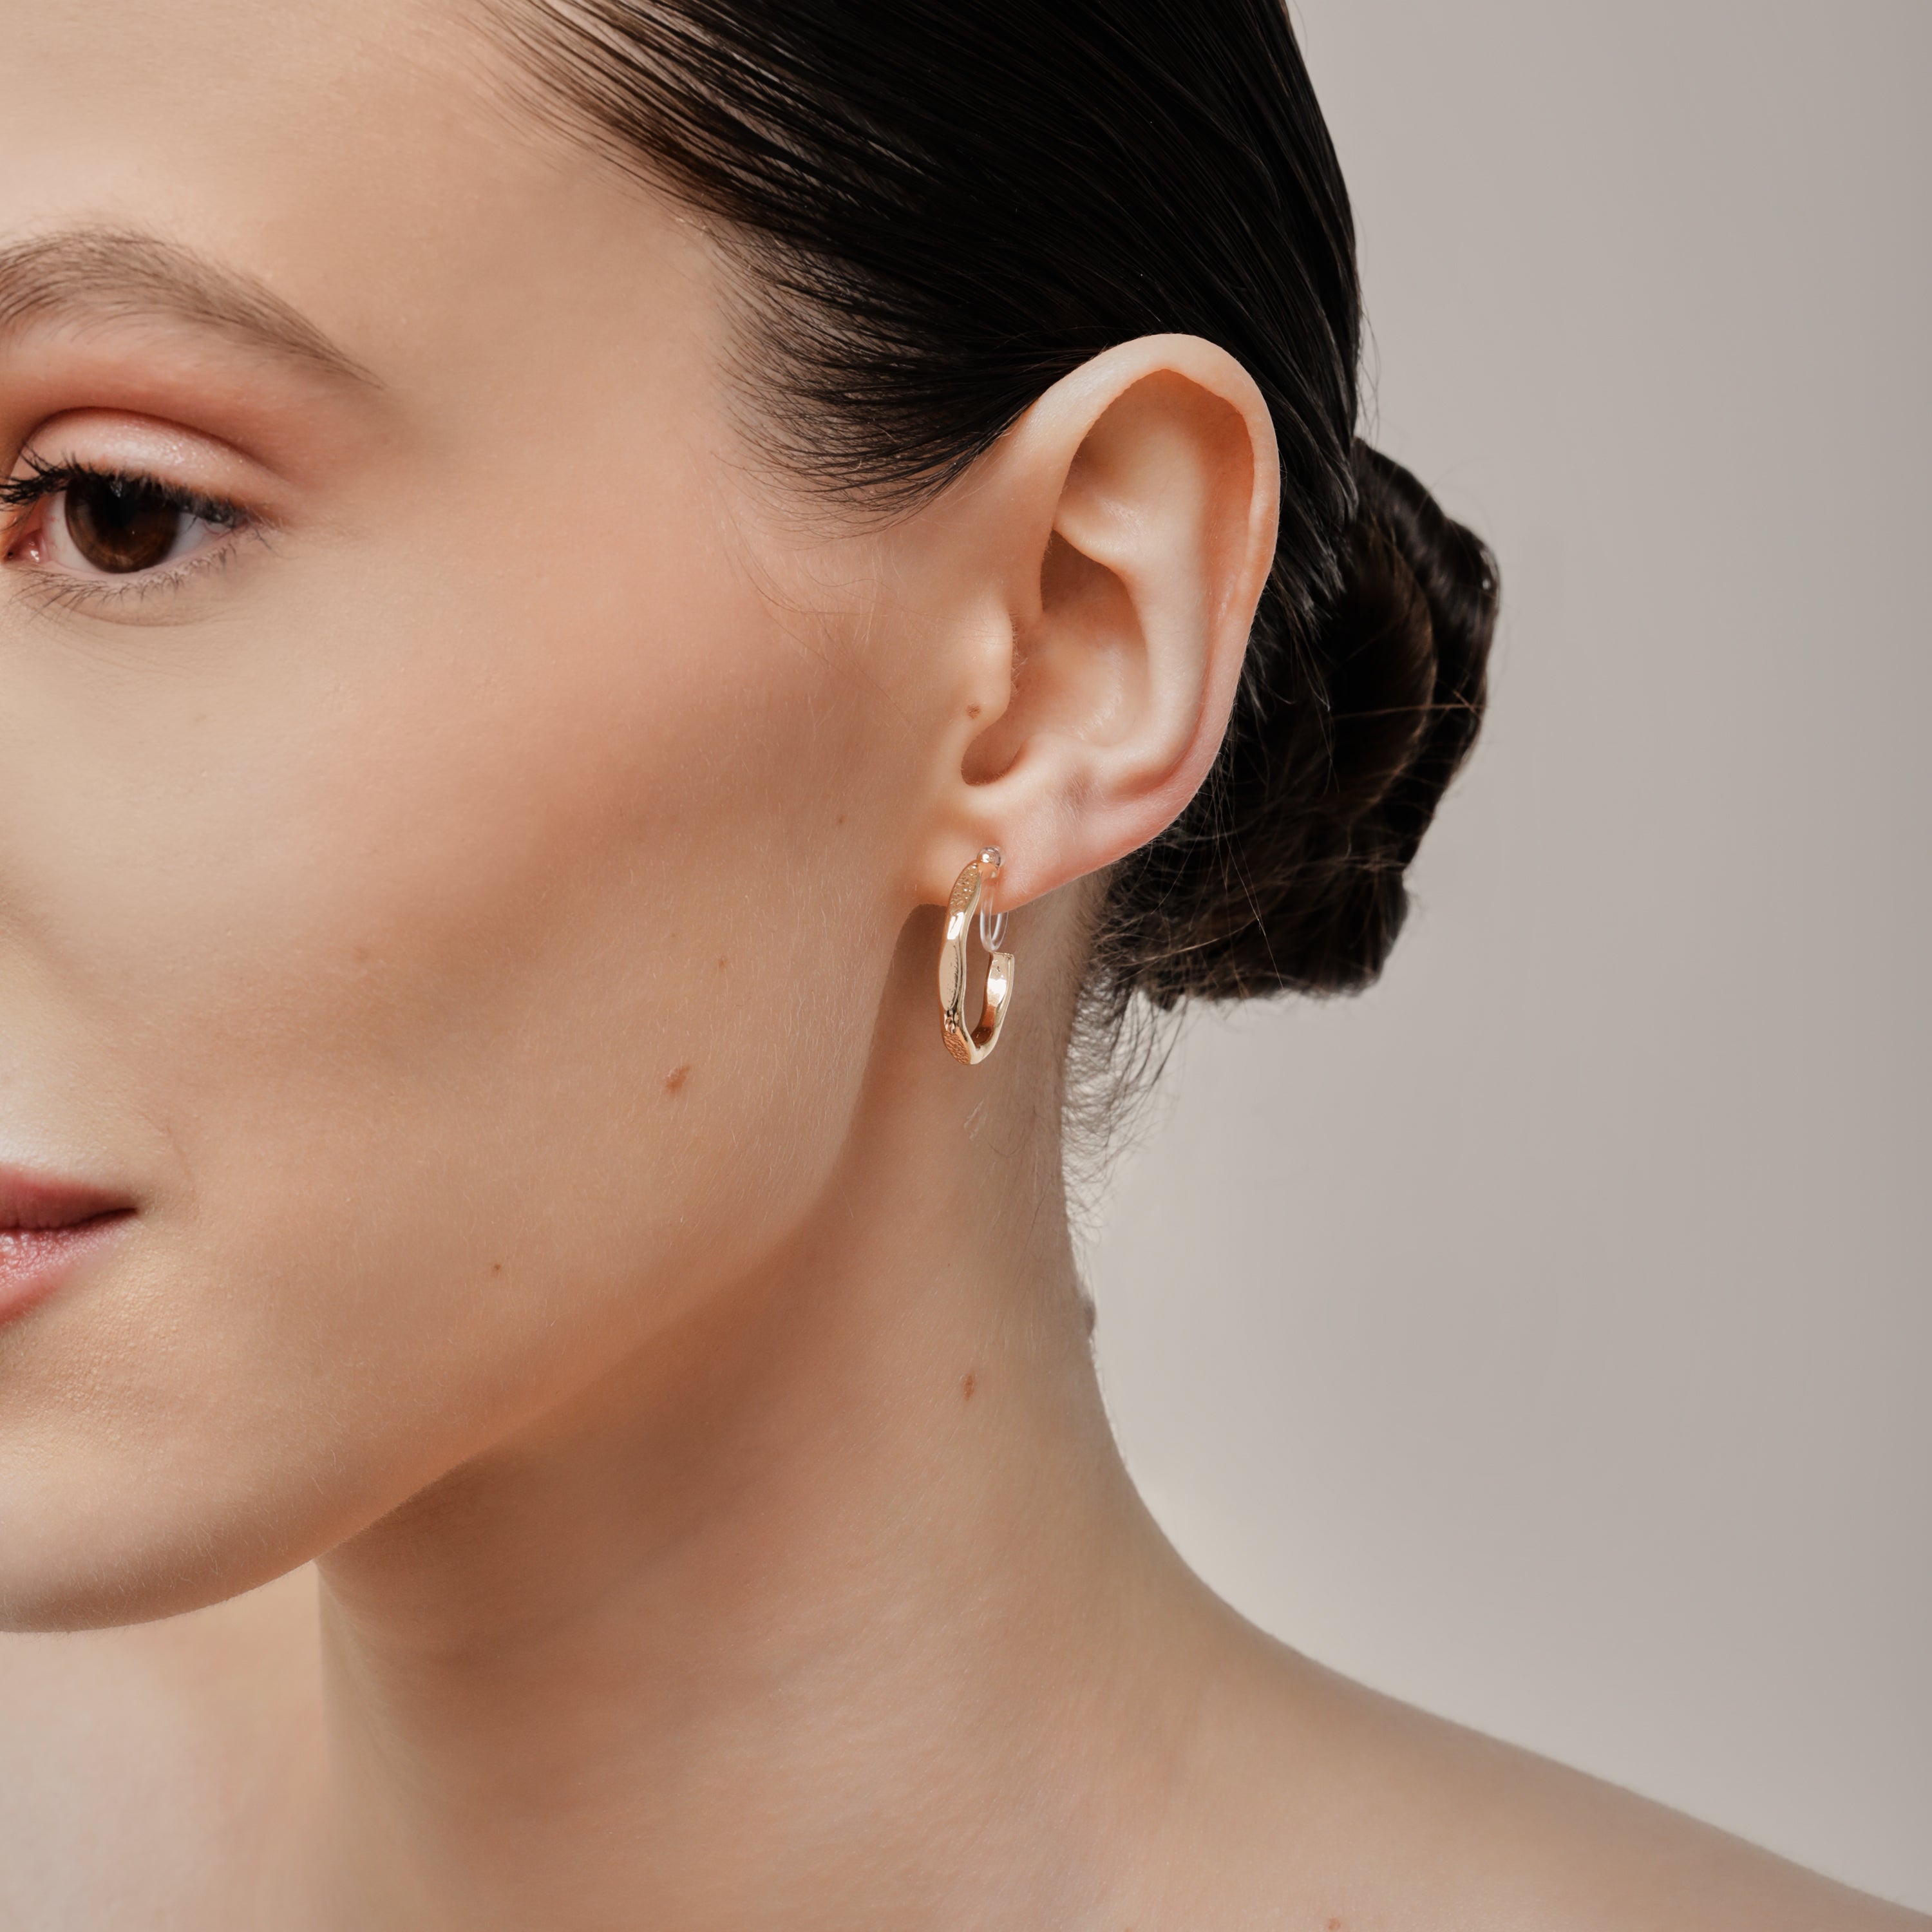 A model wearing the Smith Hoop Clip On Earrings in Gold, perfect for all ear sizes. With a resin clip-on closure and medium secure hold, these earrings provide comfort for 8-12 hours. Whether you have thick, large, or sensitive ears, these earrings are a must-have! Note: No adjustments possible and one pair only.